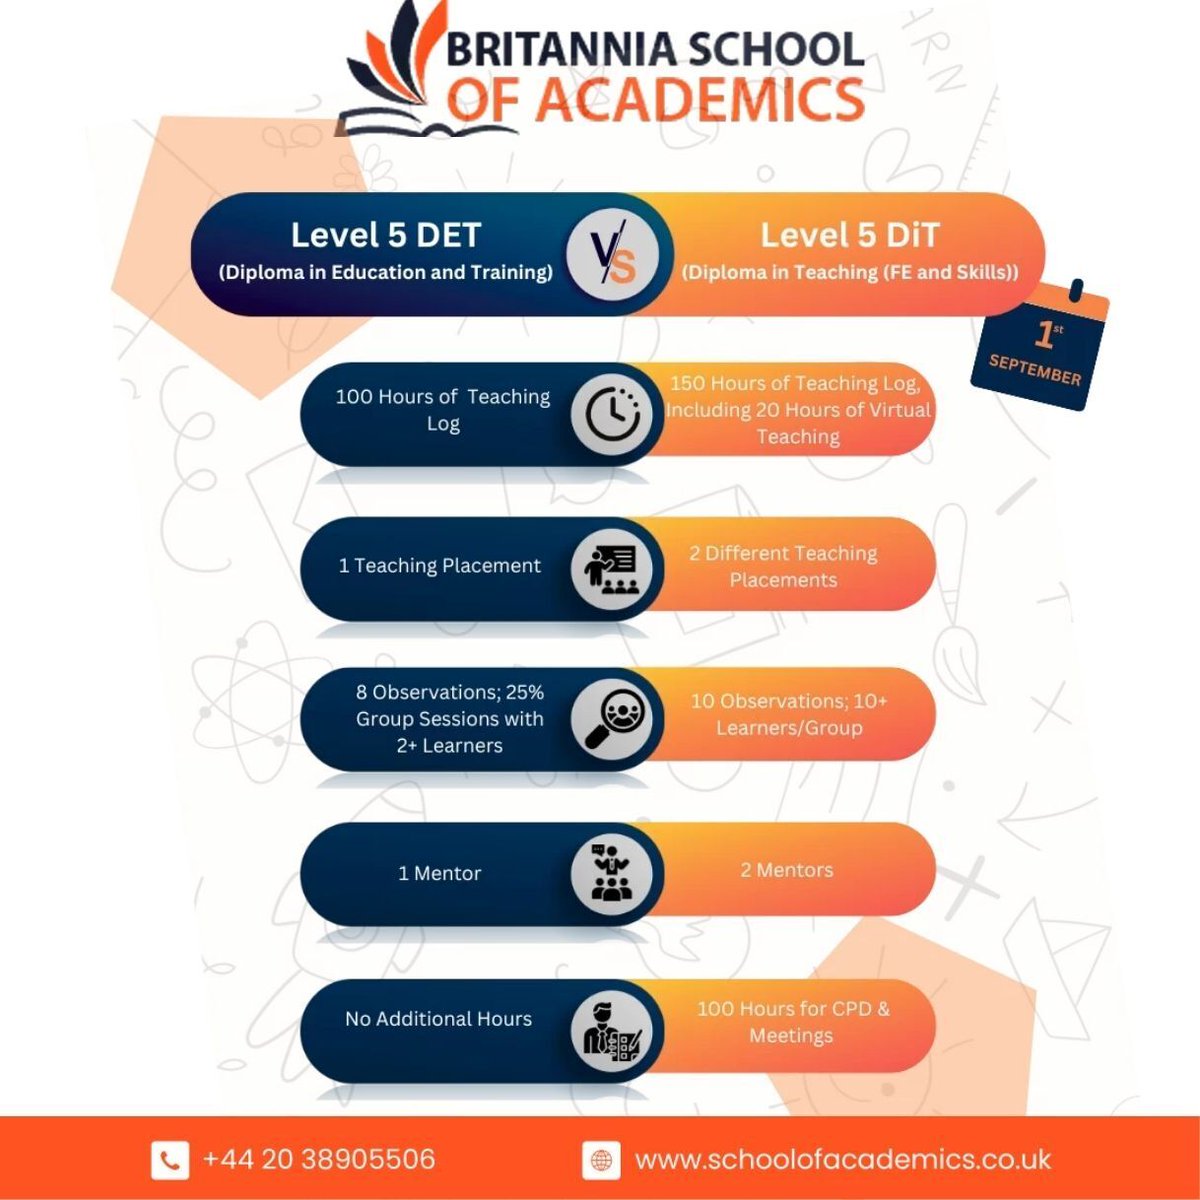 👩‍🎓 Secure your spot in the Level 5 Diploma in Education & Training at #BritanniaSchoolofAcademics before the tougher Diploma in Teaching replaces it!

Seize the opportunity, Enrol now!

#TeachingAssistant #FurtherEducation #FE #HE #IAG #Functionalskills #Ethical #Apprenticeships